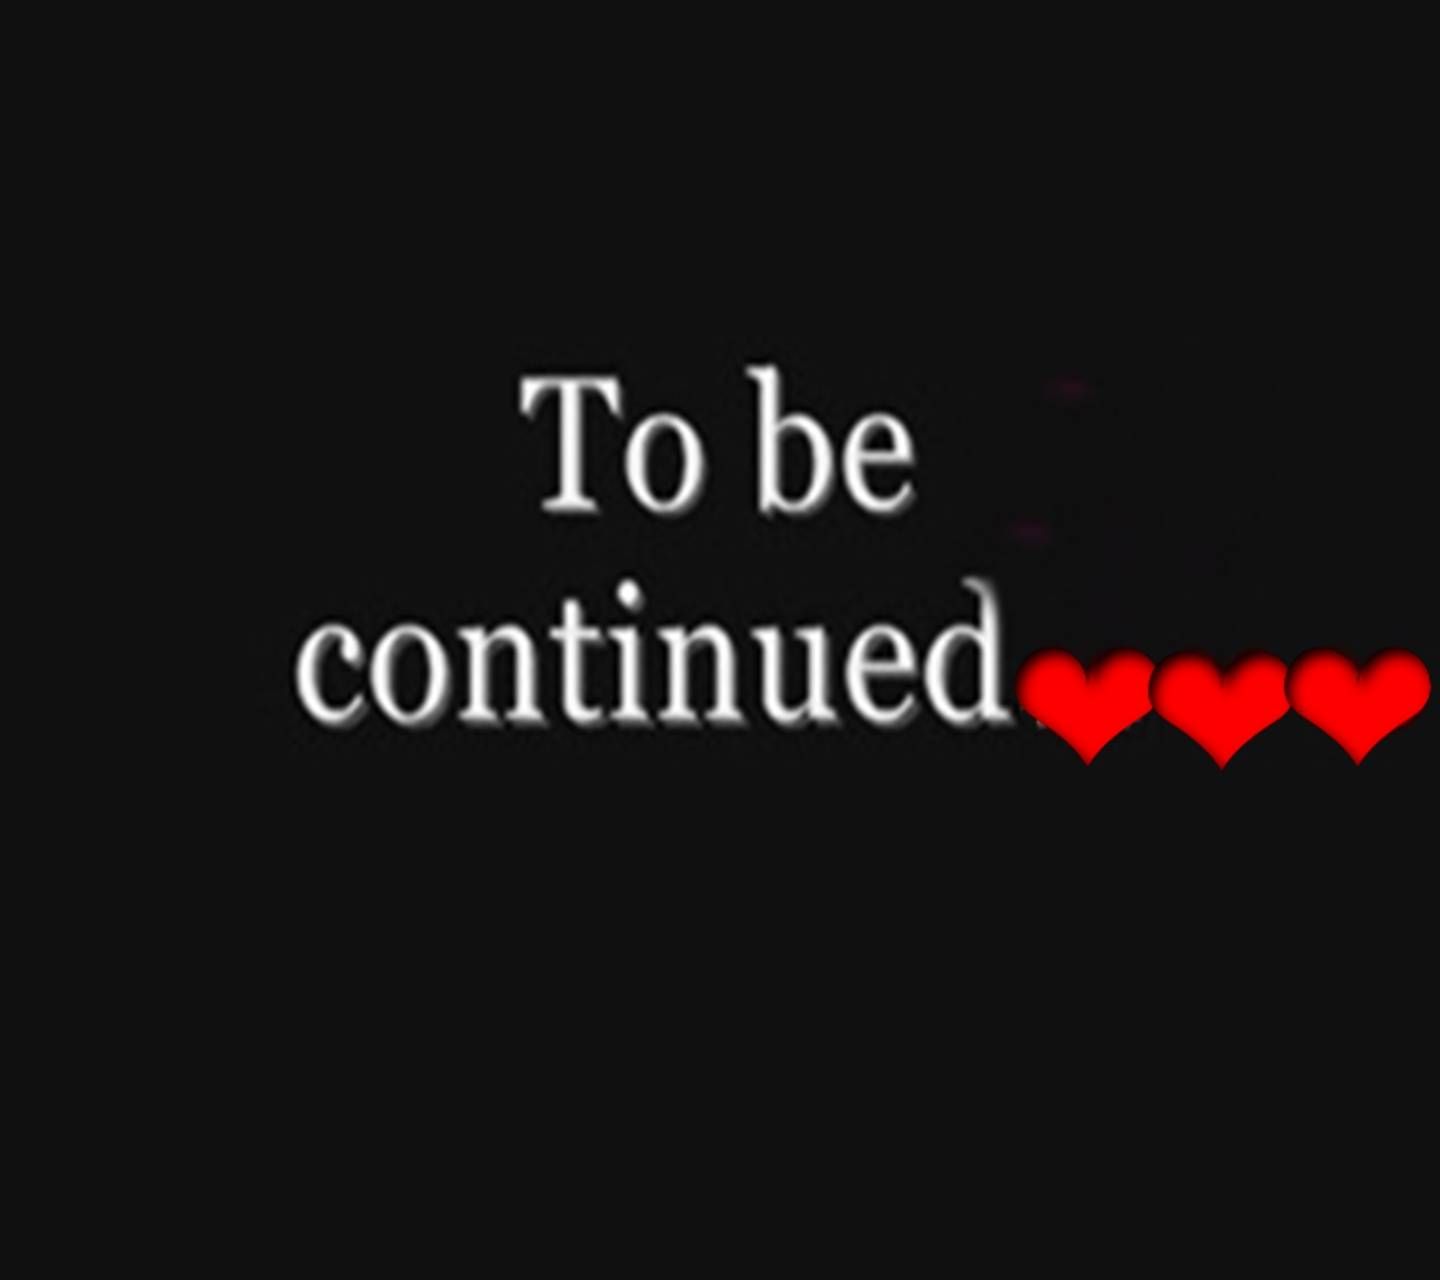 To Be Continued wallpaper